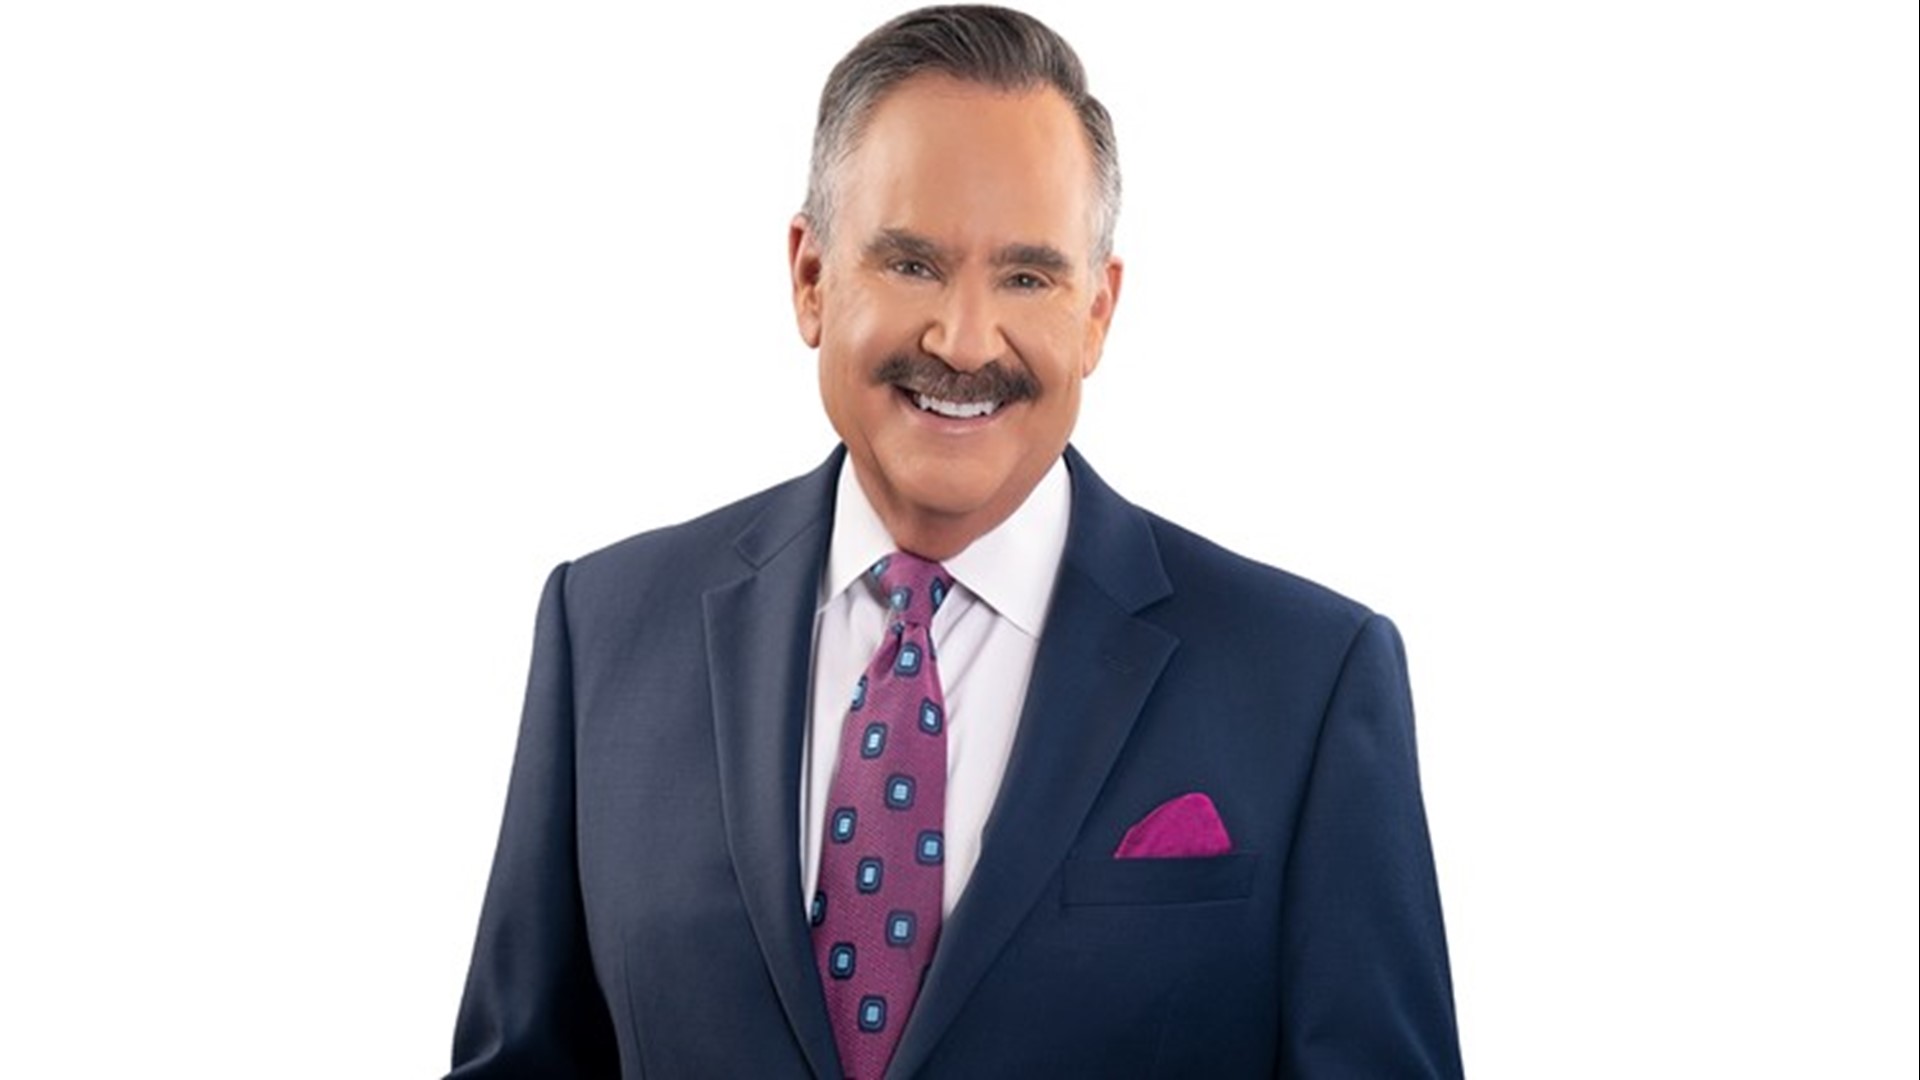 Broadcasting legend and 12 News' anchor Mark Curtis will be officially inducted into Arizona's Broadcasters Hall of Fame. It's an exclusive club of broadcasters.